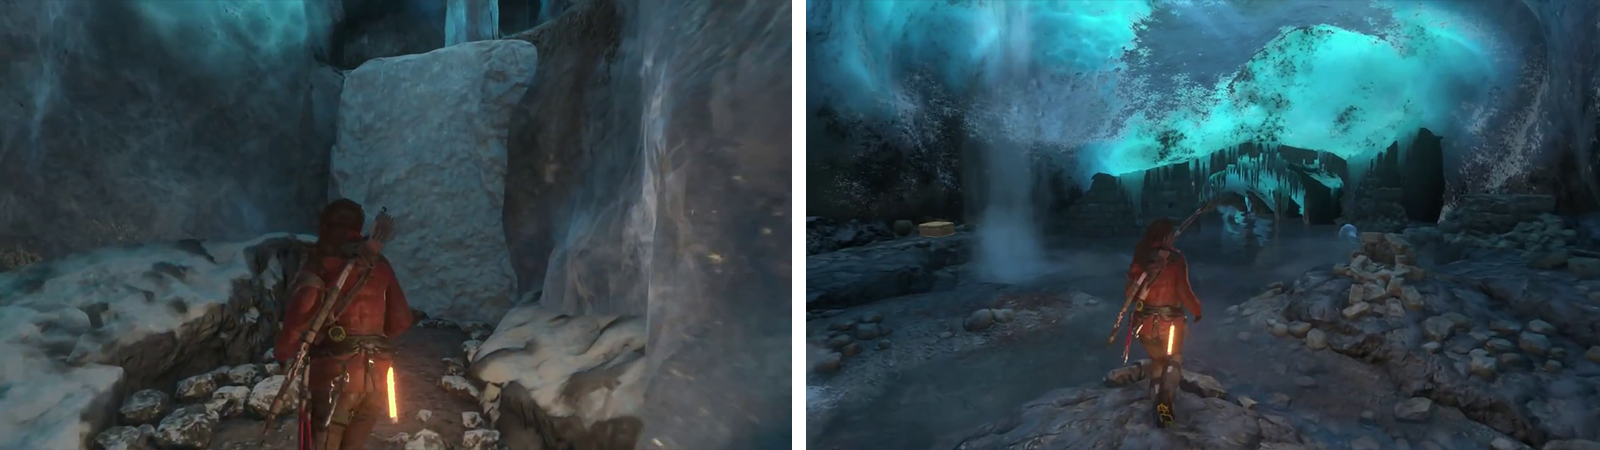 After sliding down the slope, look to the right for a ledge with Document 01 (left). Before entering the water, look to the left for a Relic (right).